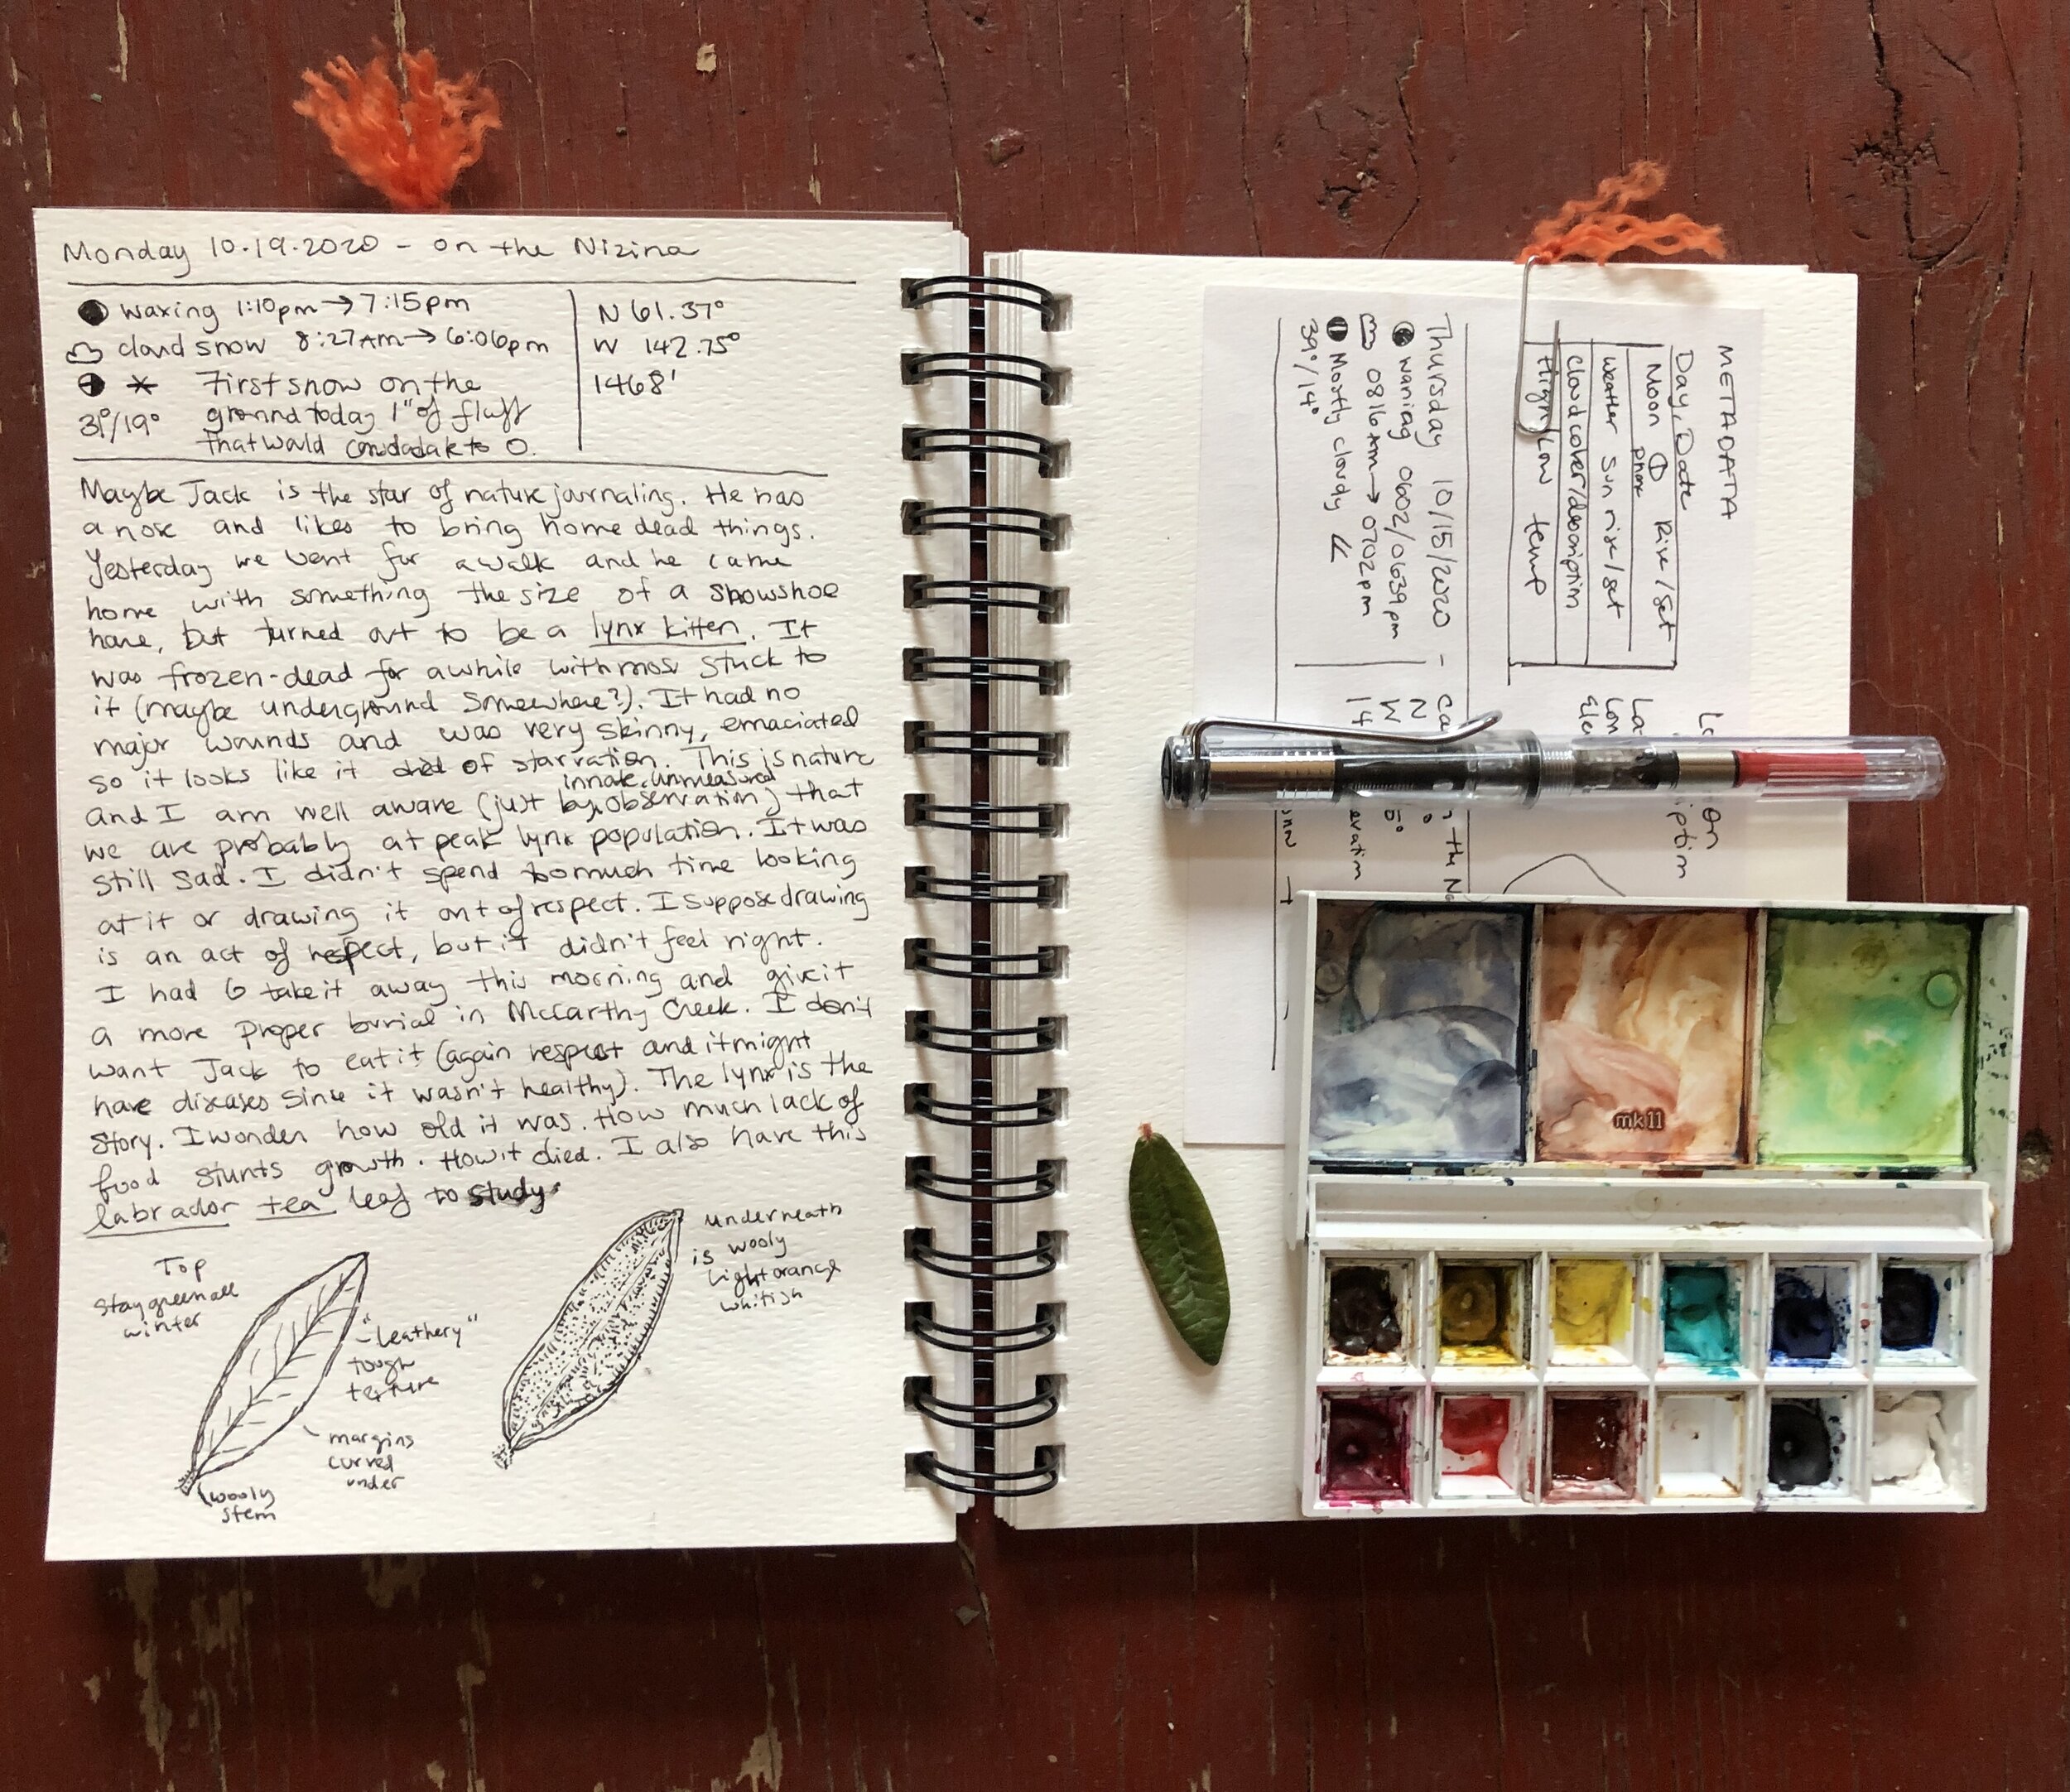 First page of my Nature Journal : r/naturejournaling